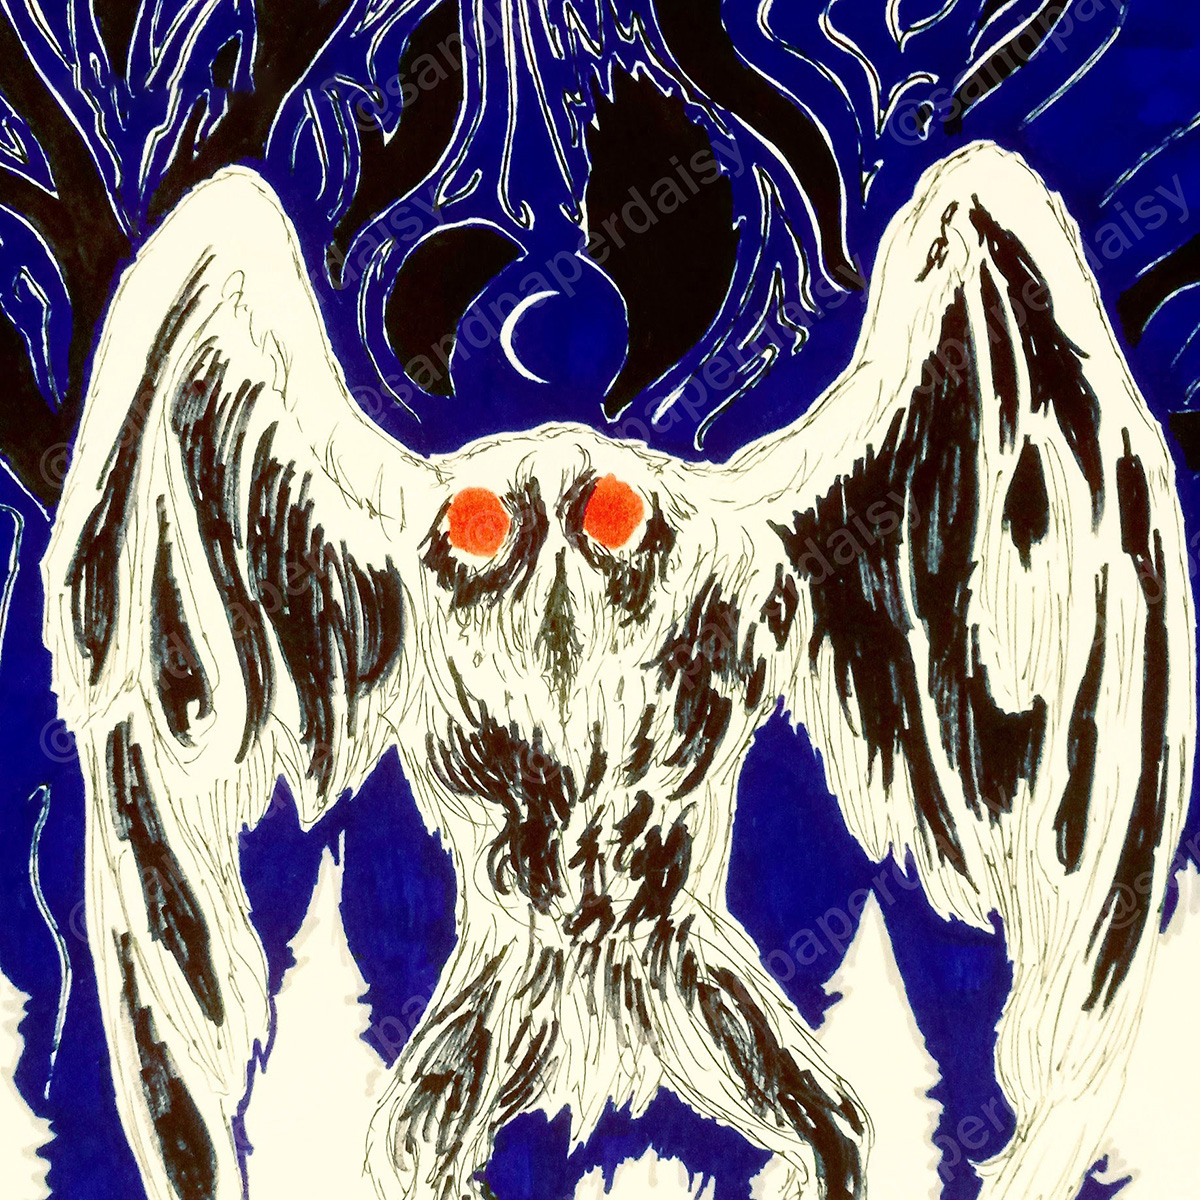 Mothman with red eyes against a dark forest and crescent moon pen and ink on paper